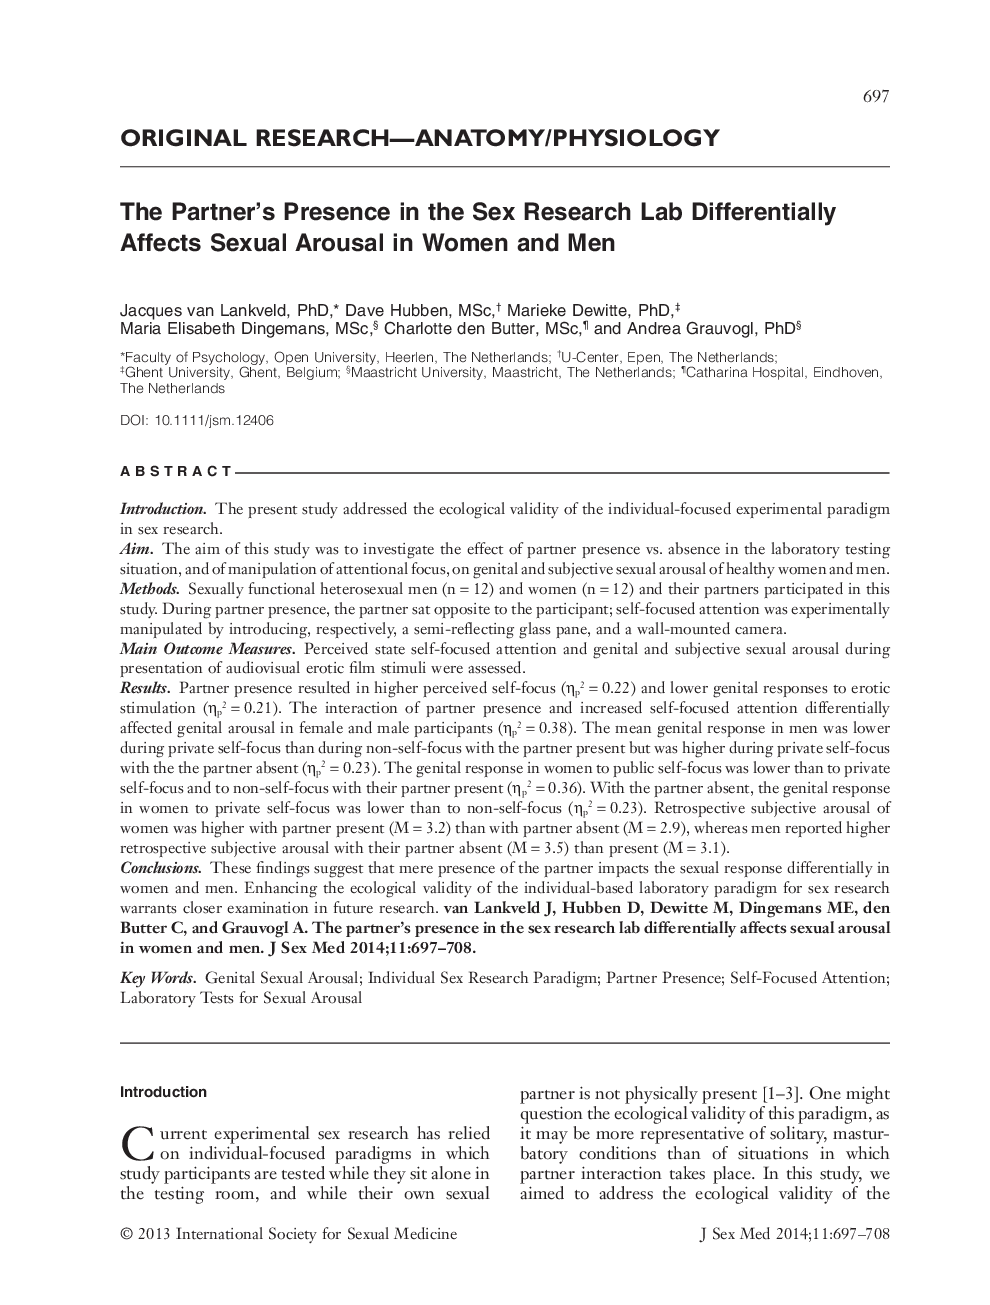 The Partner’s Presence in the Sex Research Lab Differentially Affects Sexual Arousal in Women and Men 